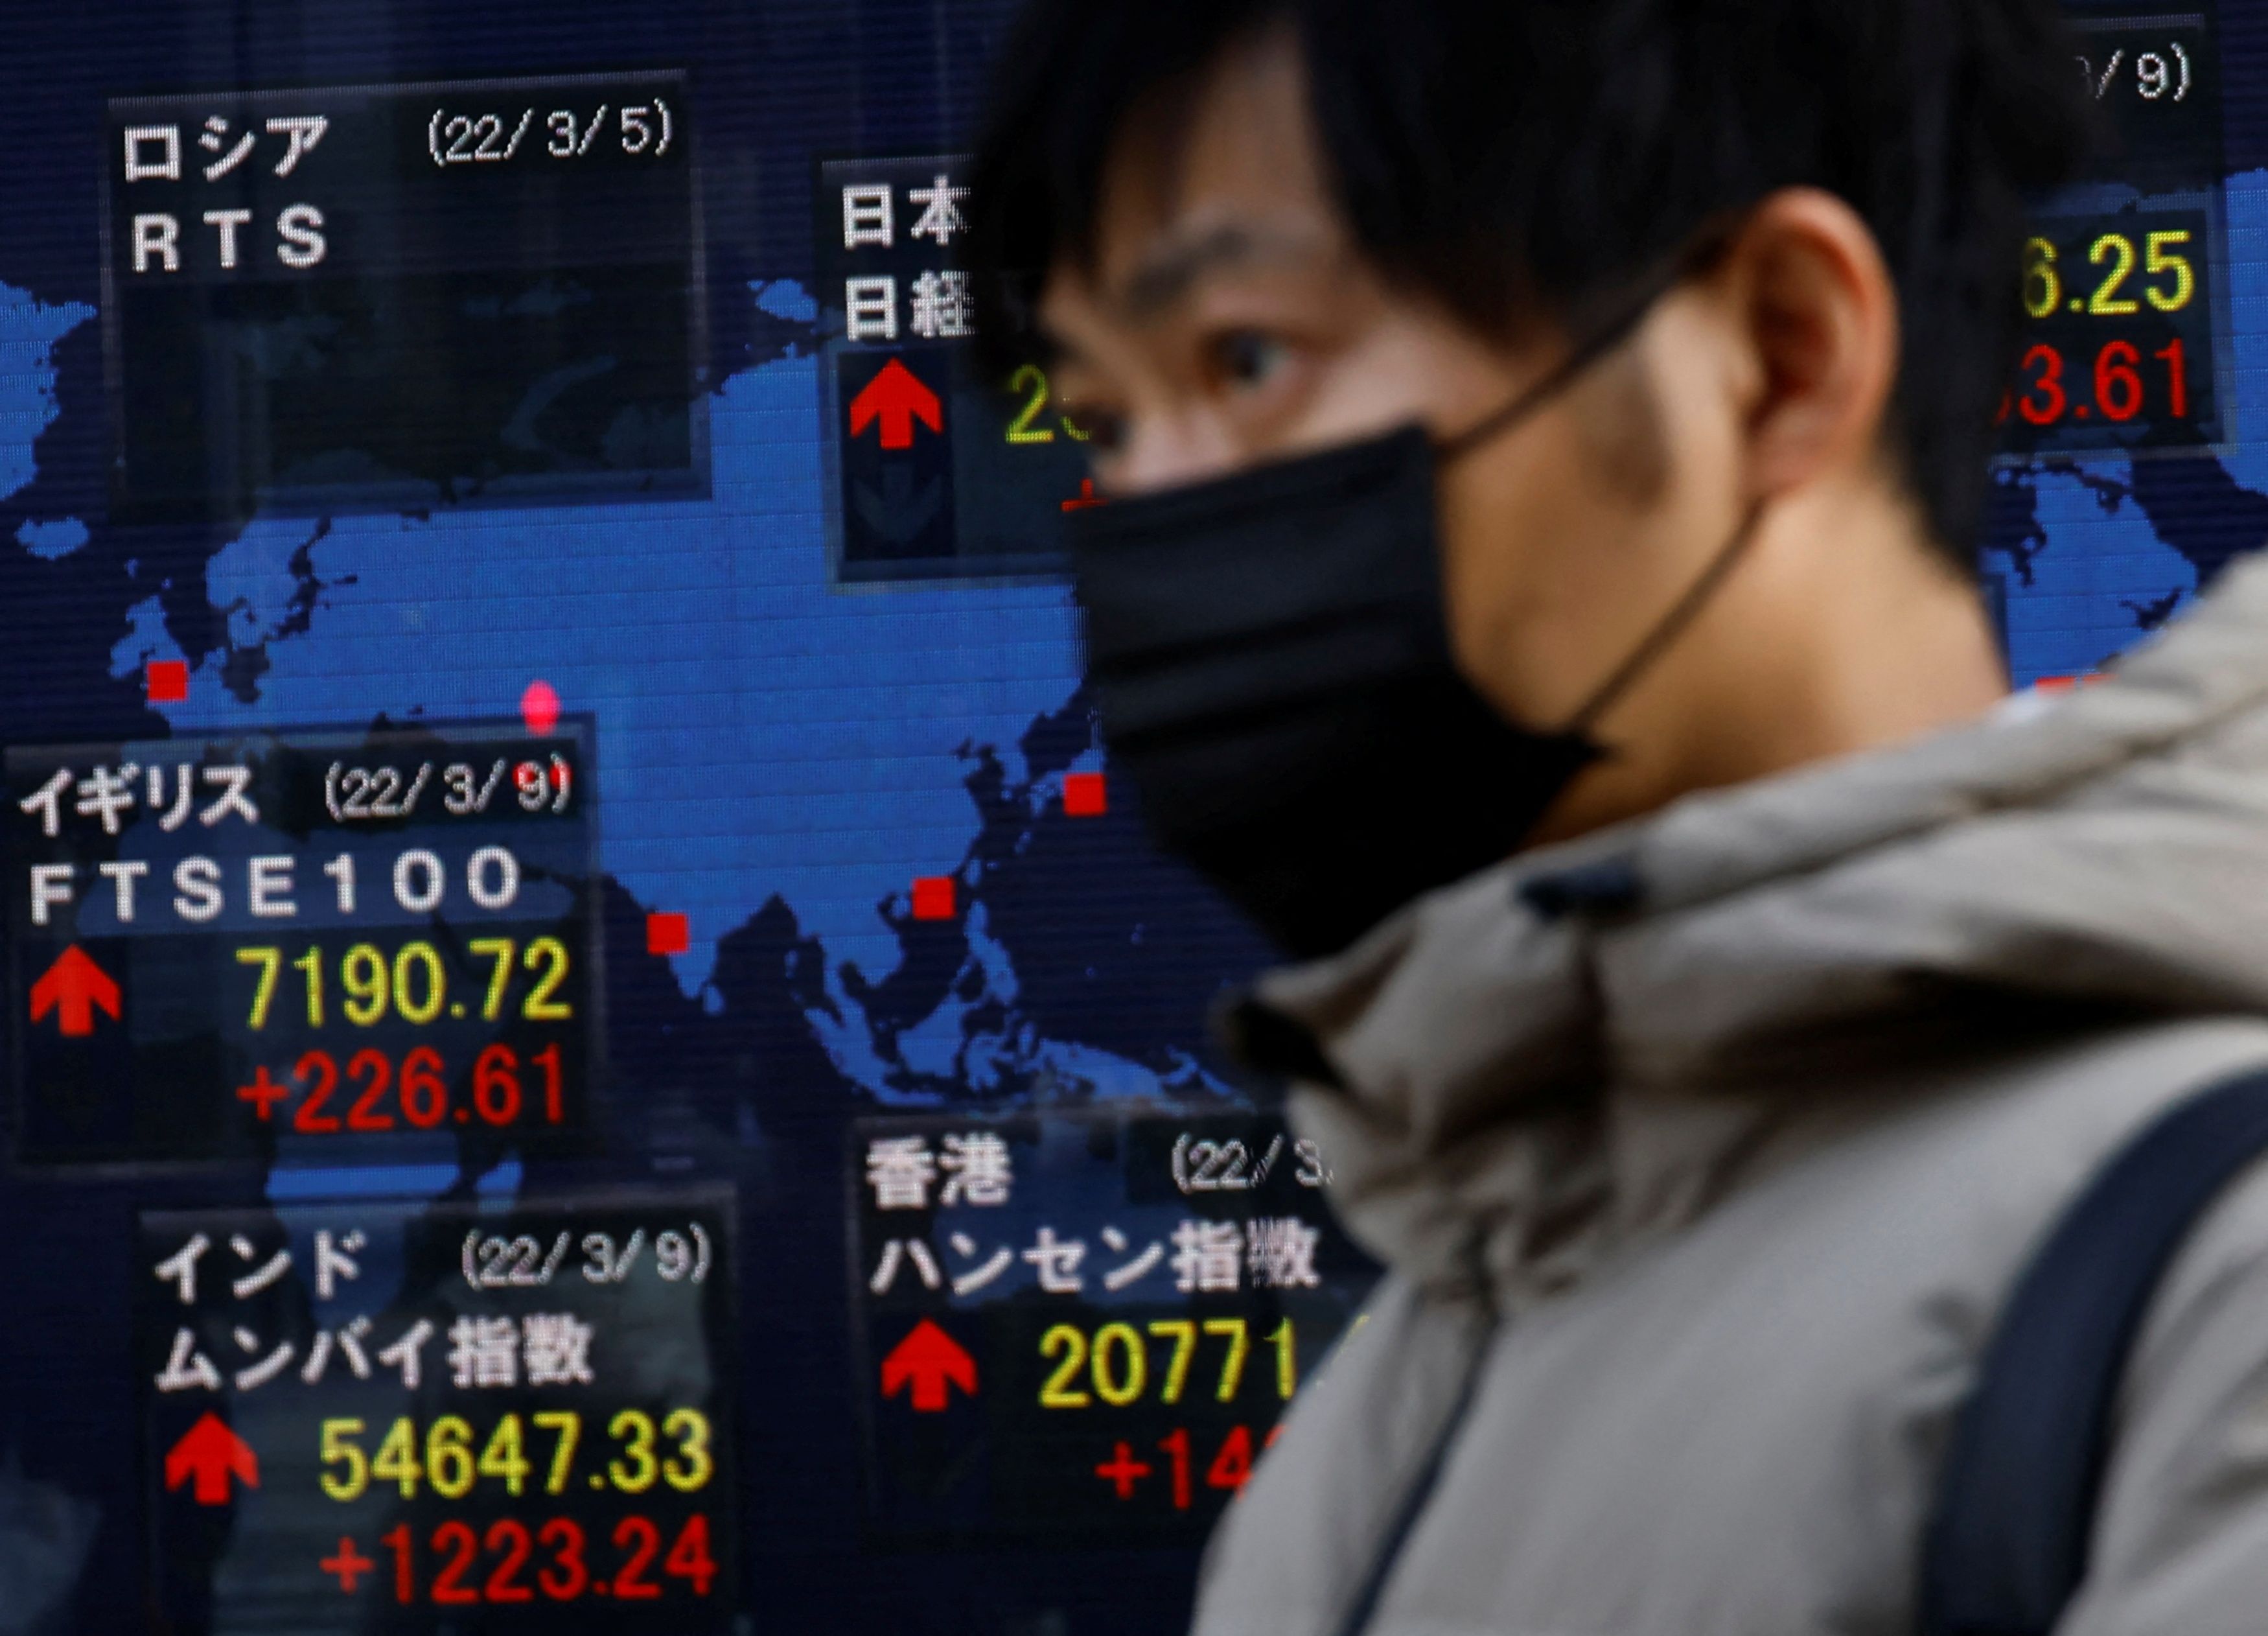 A man wearing a protective mask, amid the coronavirus disease (COVID-19) outbreak, walks past an electronic board displaying various countries' stock indexes including  Russian Trading System (RTS) Index which is empty, outside a brokerage in Tokyo